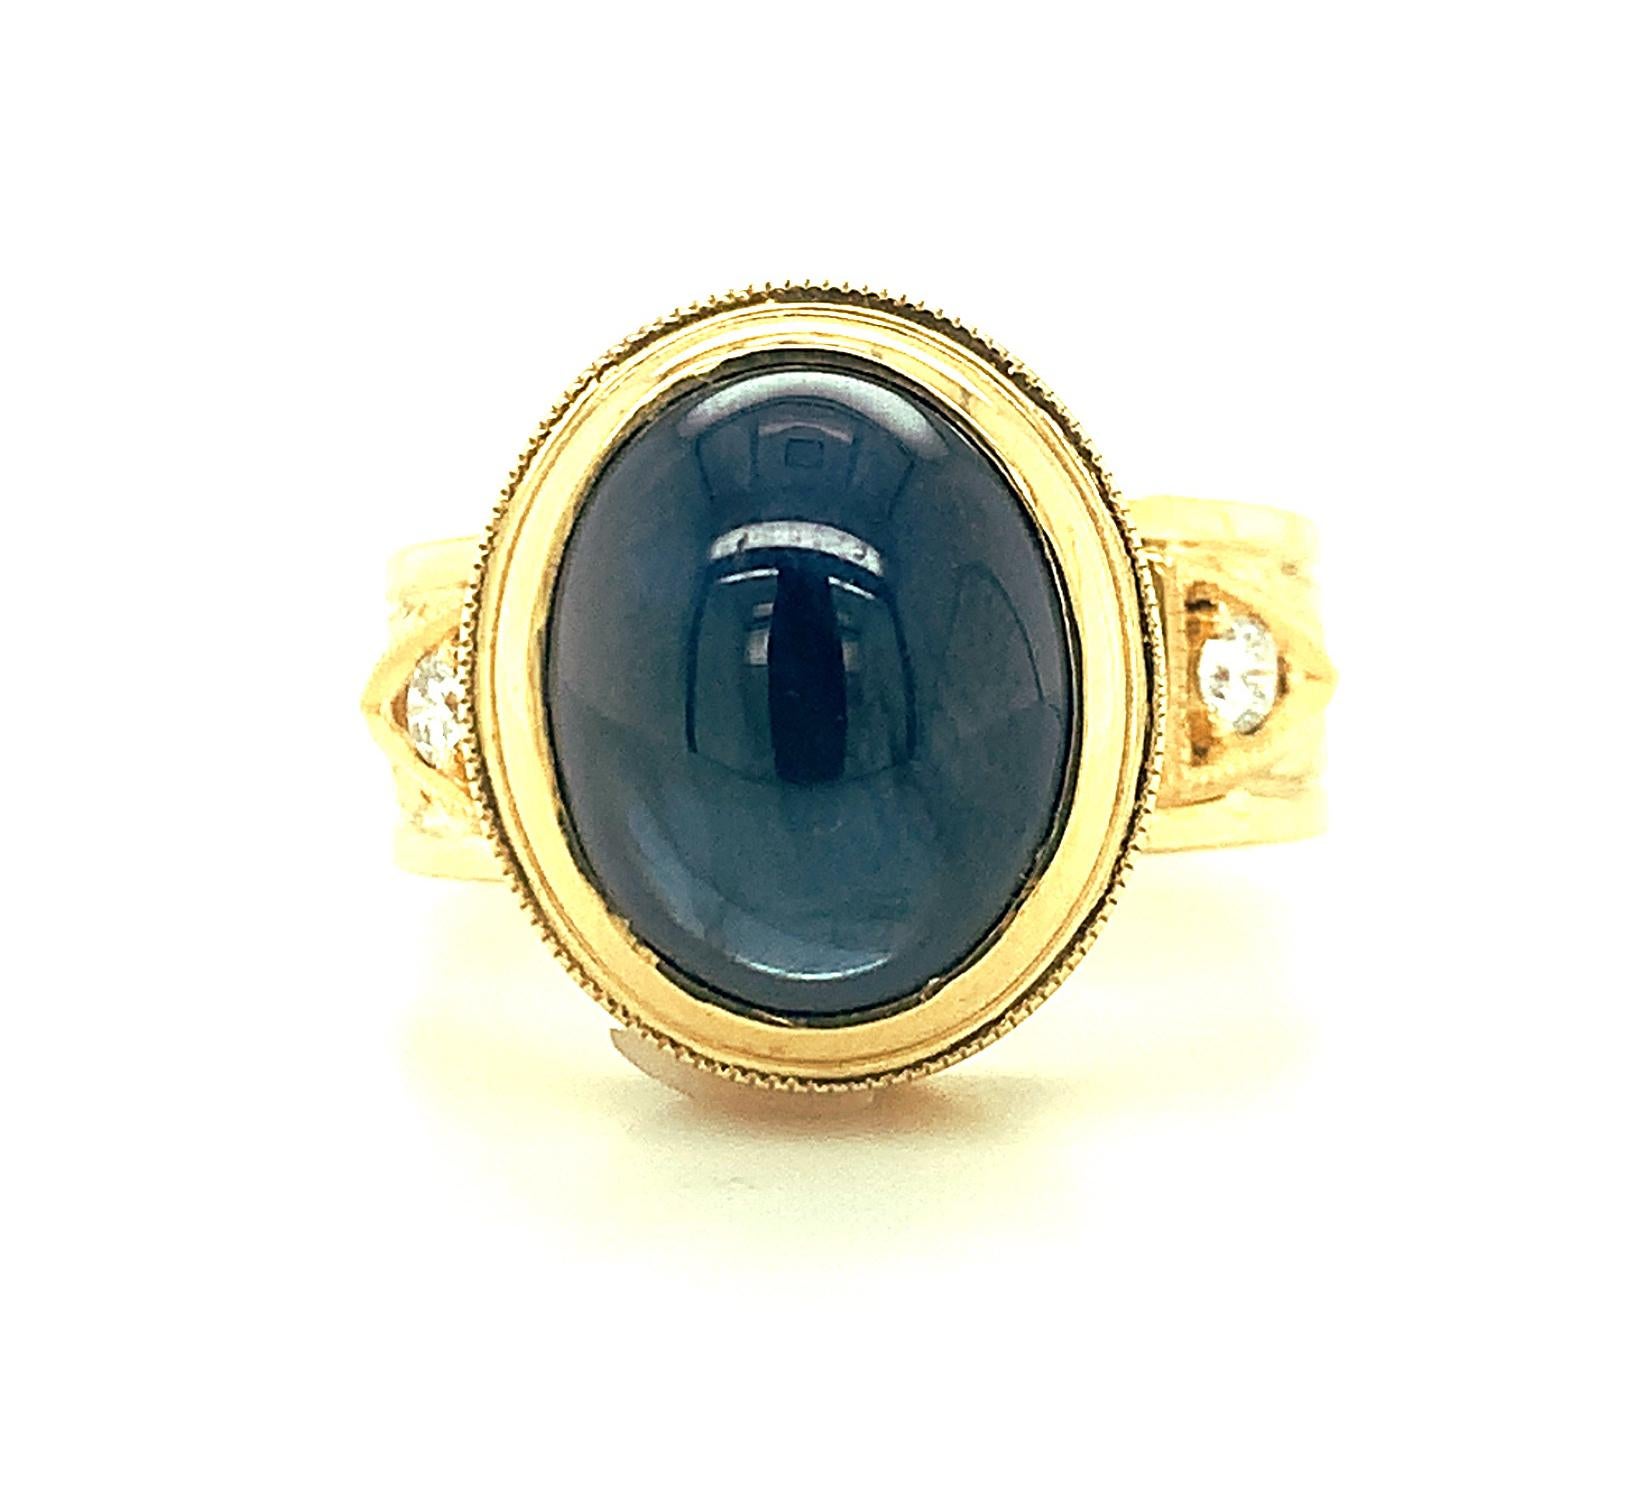 This handsome ring features a large, 9.06 navy blue sapphire cabochon, beautifully bezel set in an intricately engraved 18k yellow gold ring. The gorgeous hand engraved band displays stunning artistry and is set with two round brilliant white